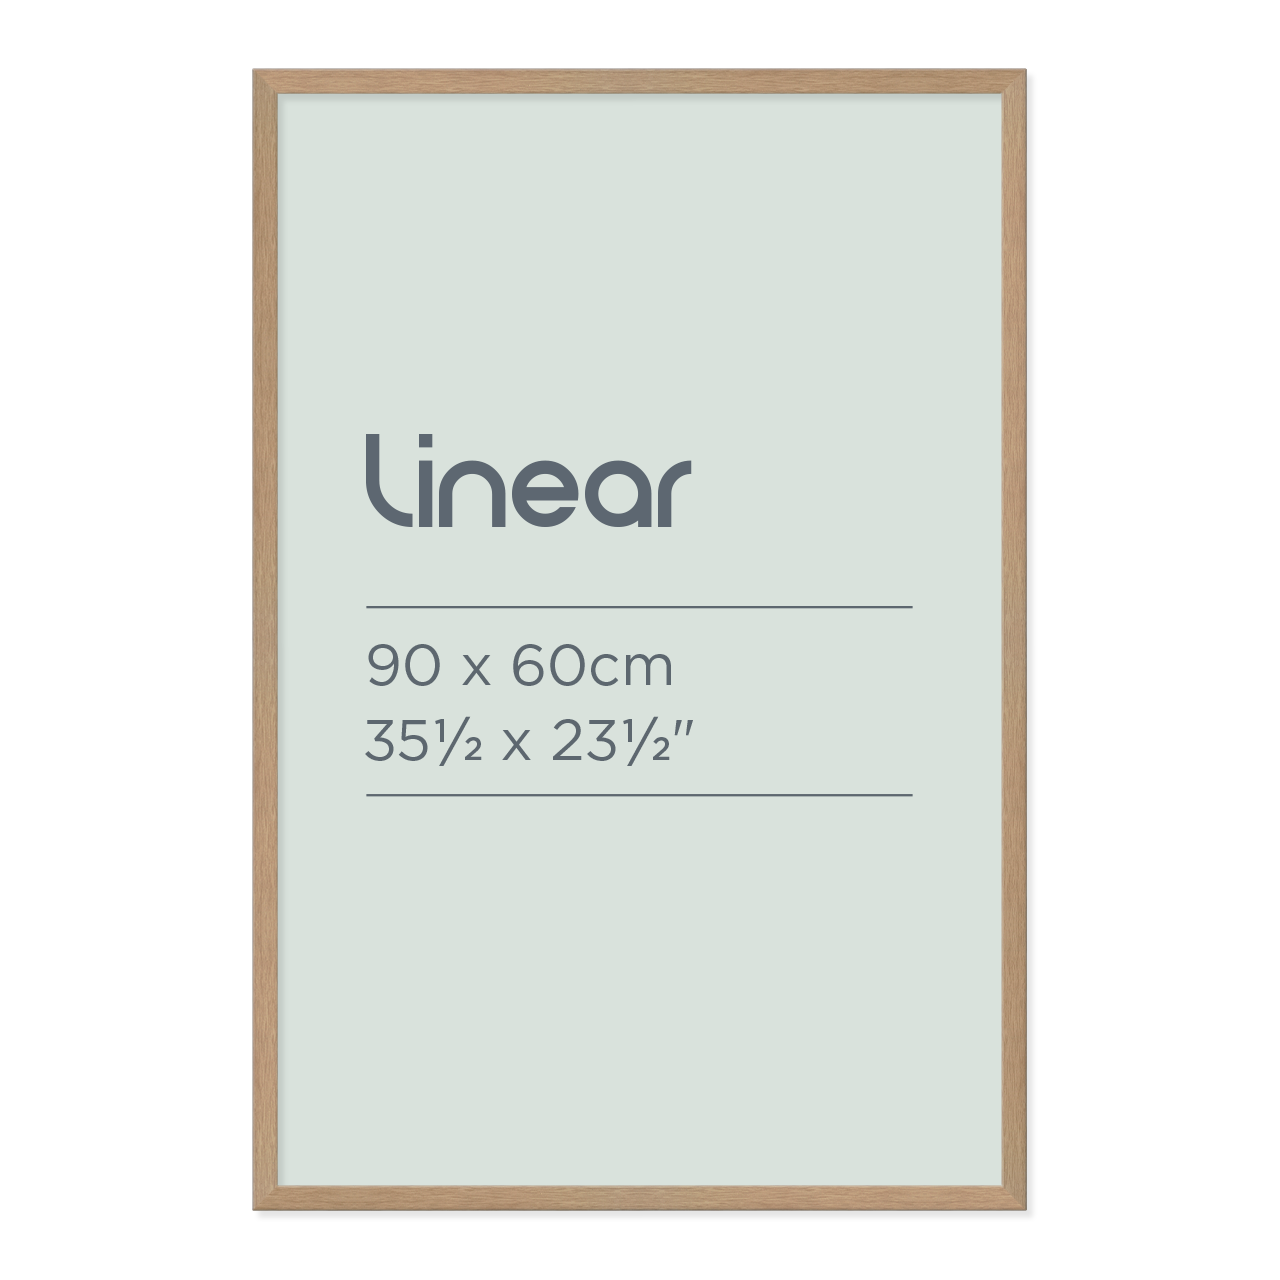 Linear Natural Picture Frame for 90 x 60cm Artwork